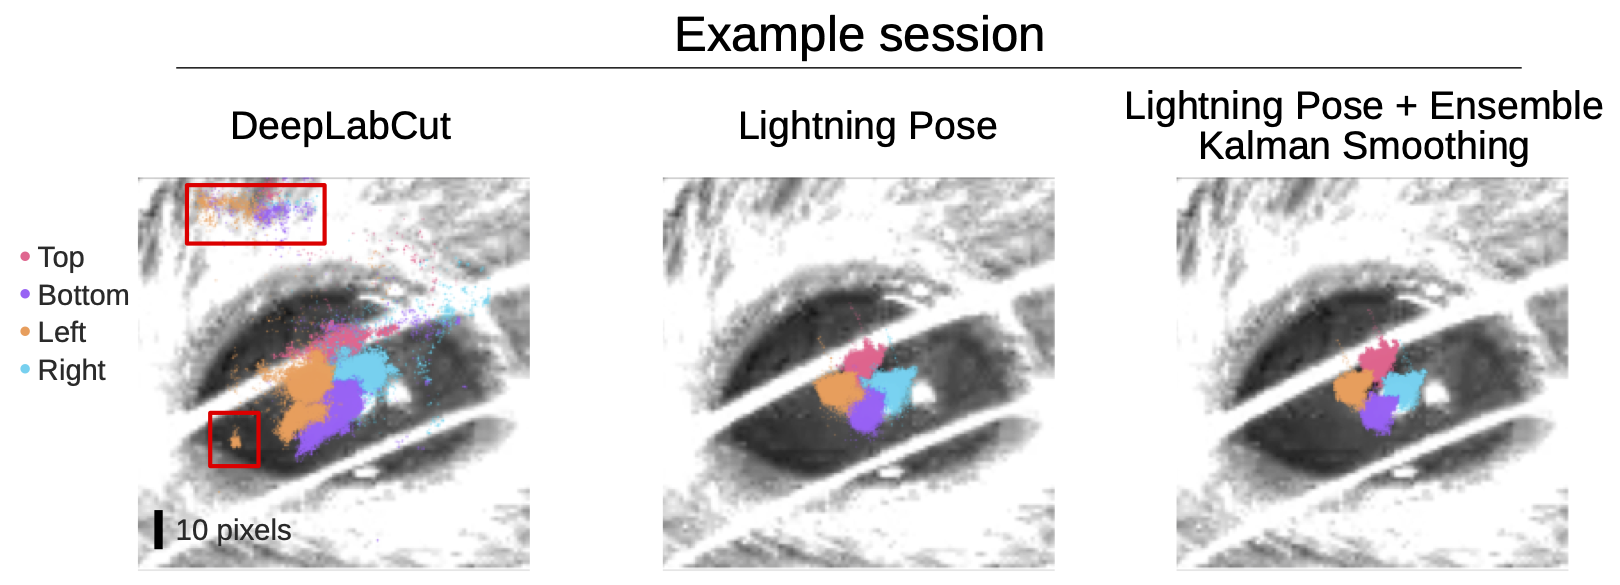 Prediction comparison of mouse pupil tracking between DeepLabCut model and Lightning Pose, and Lightning Pose combined with Ensemble Kalman Smoothing